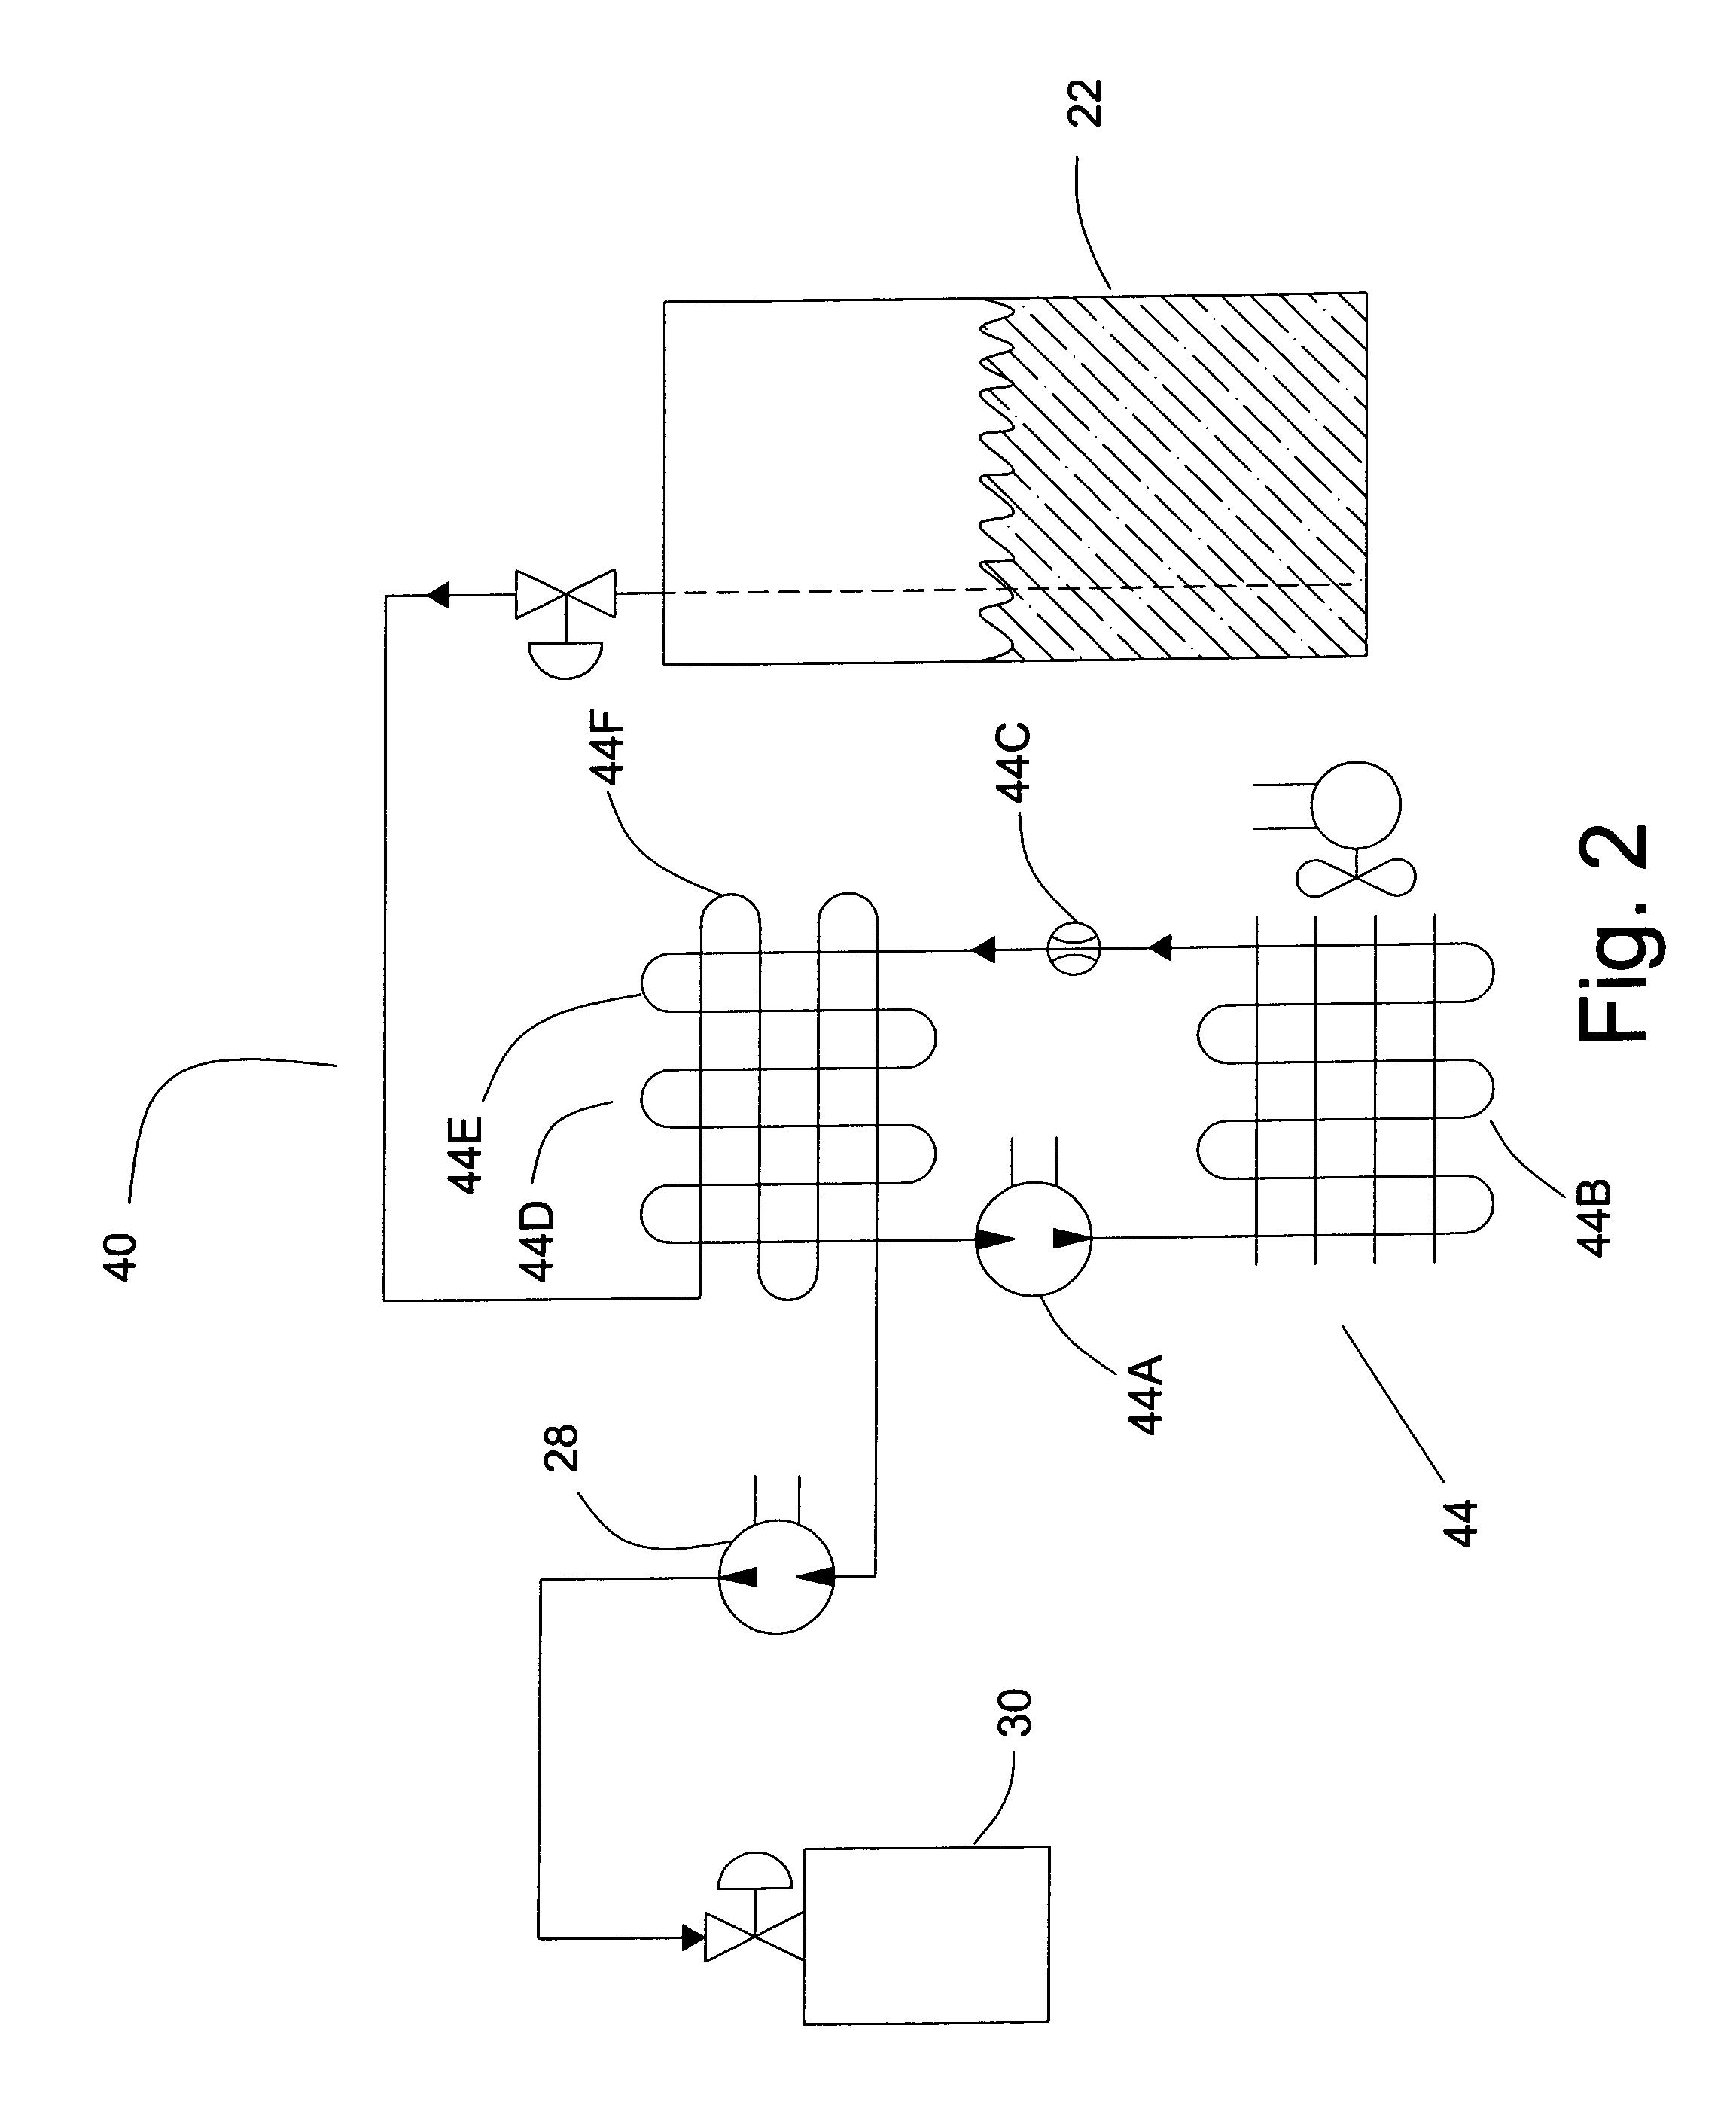 System and method of pumping liquified gas